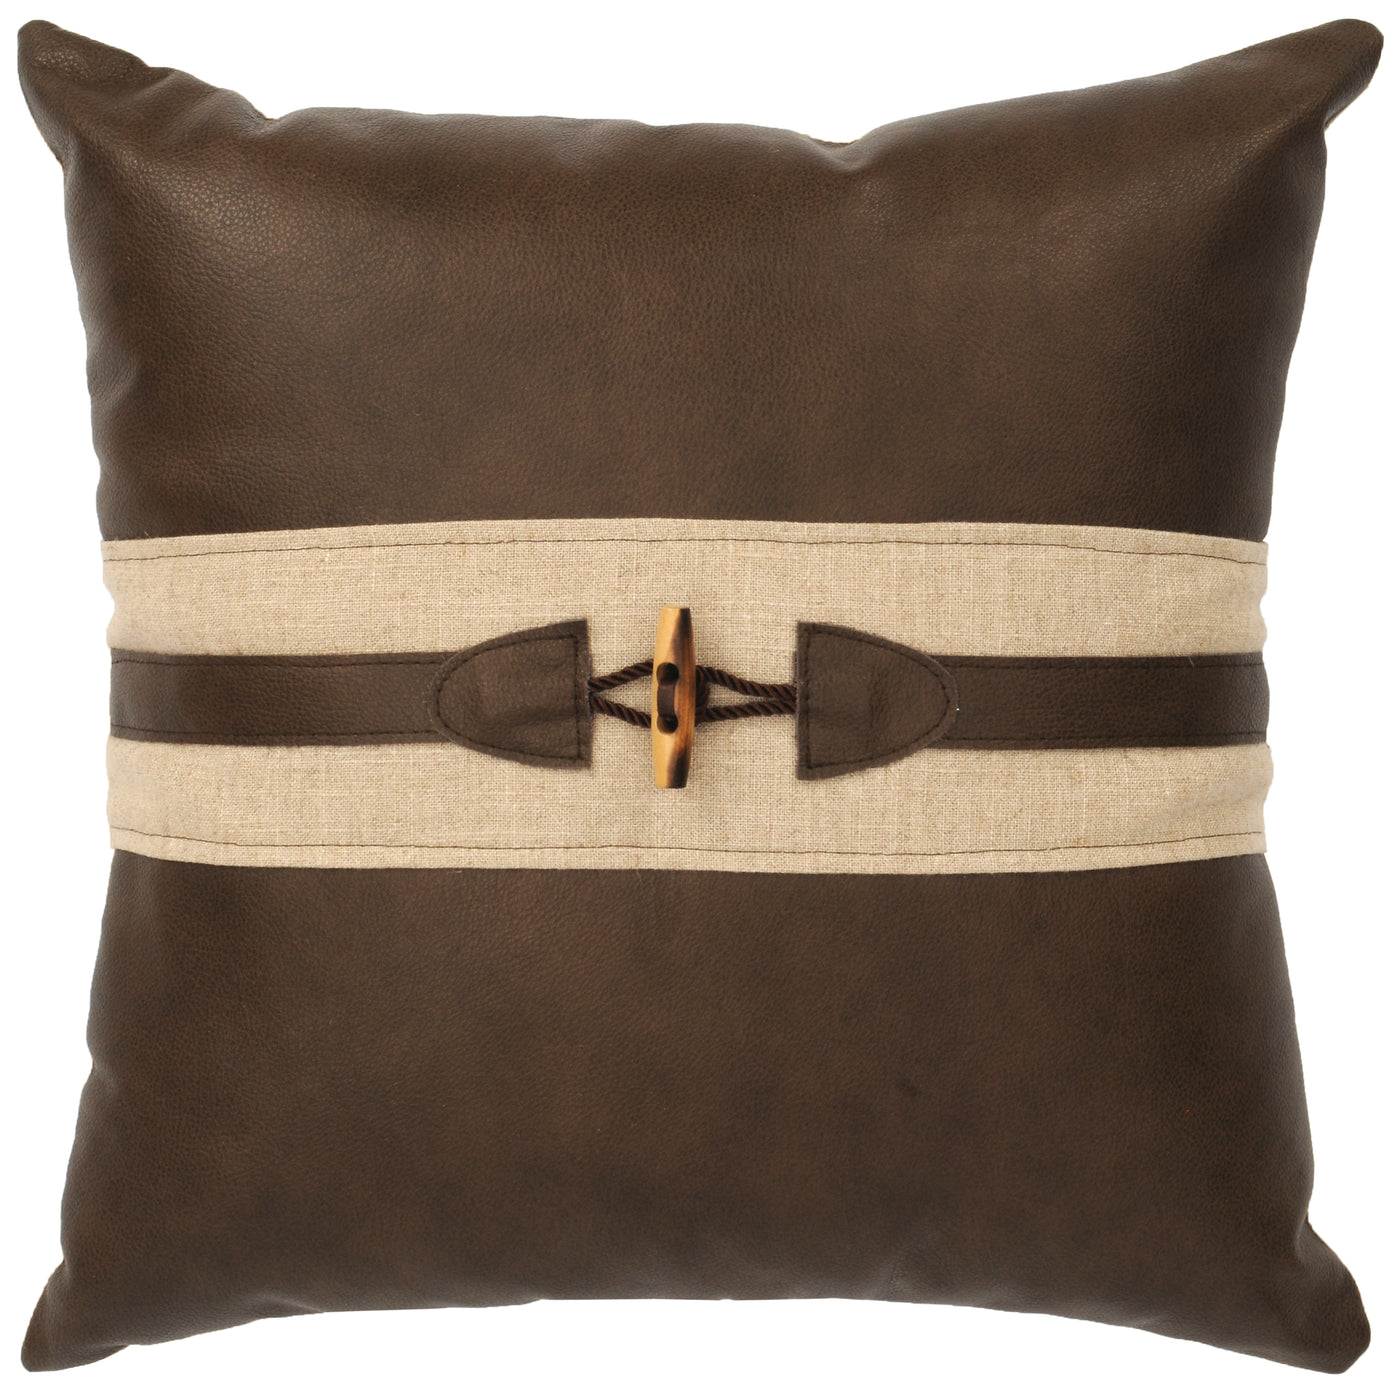 Canvello Prince Leather Pillow (18"x18")